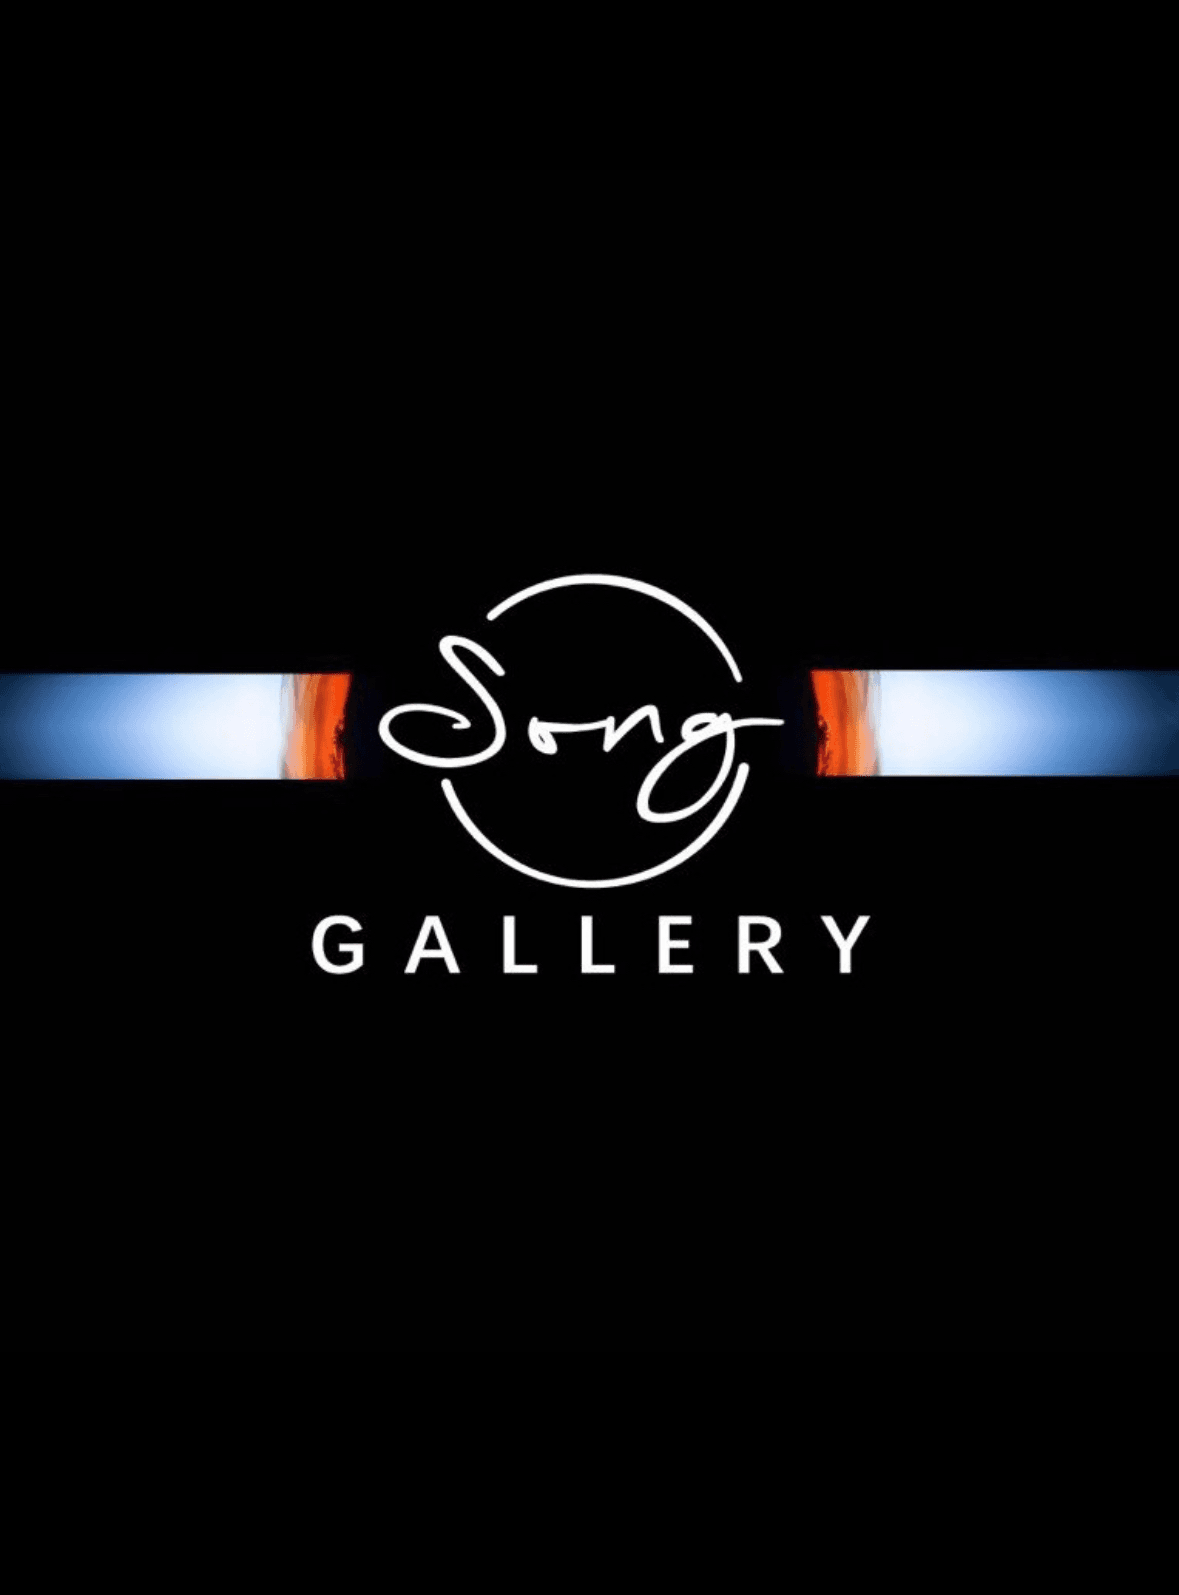 TheSongGallery